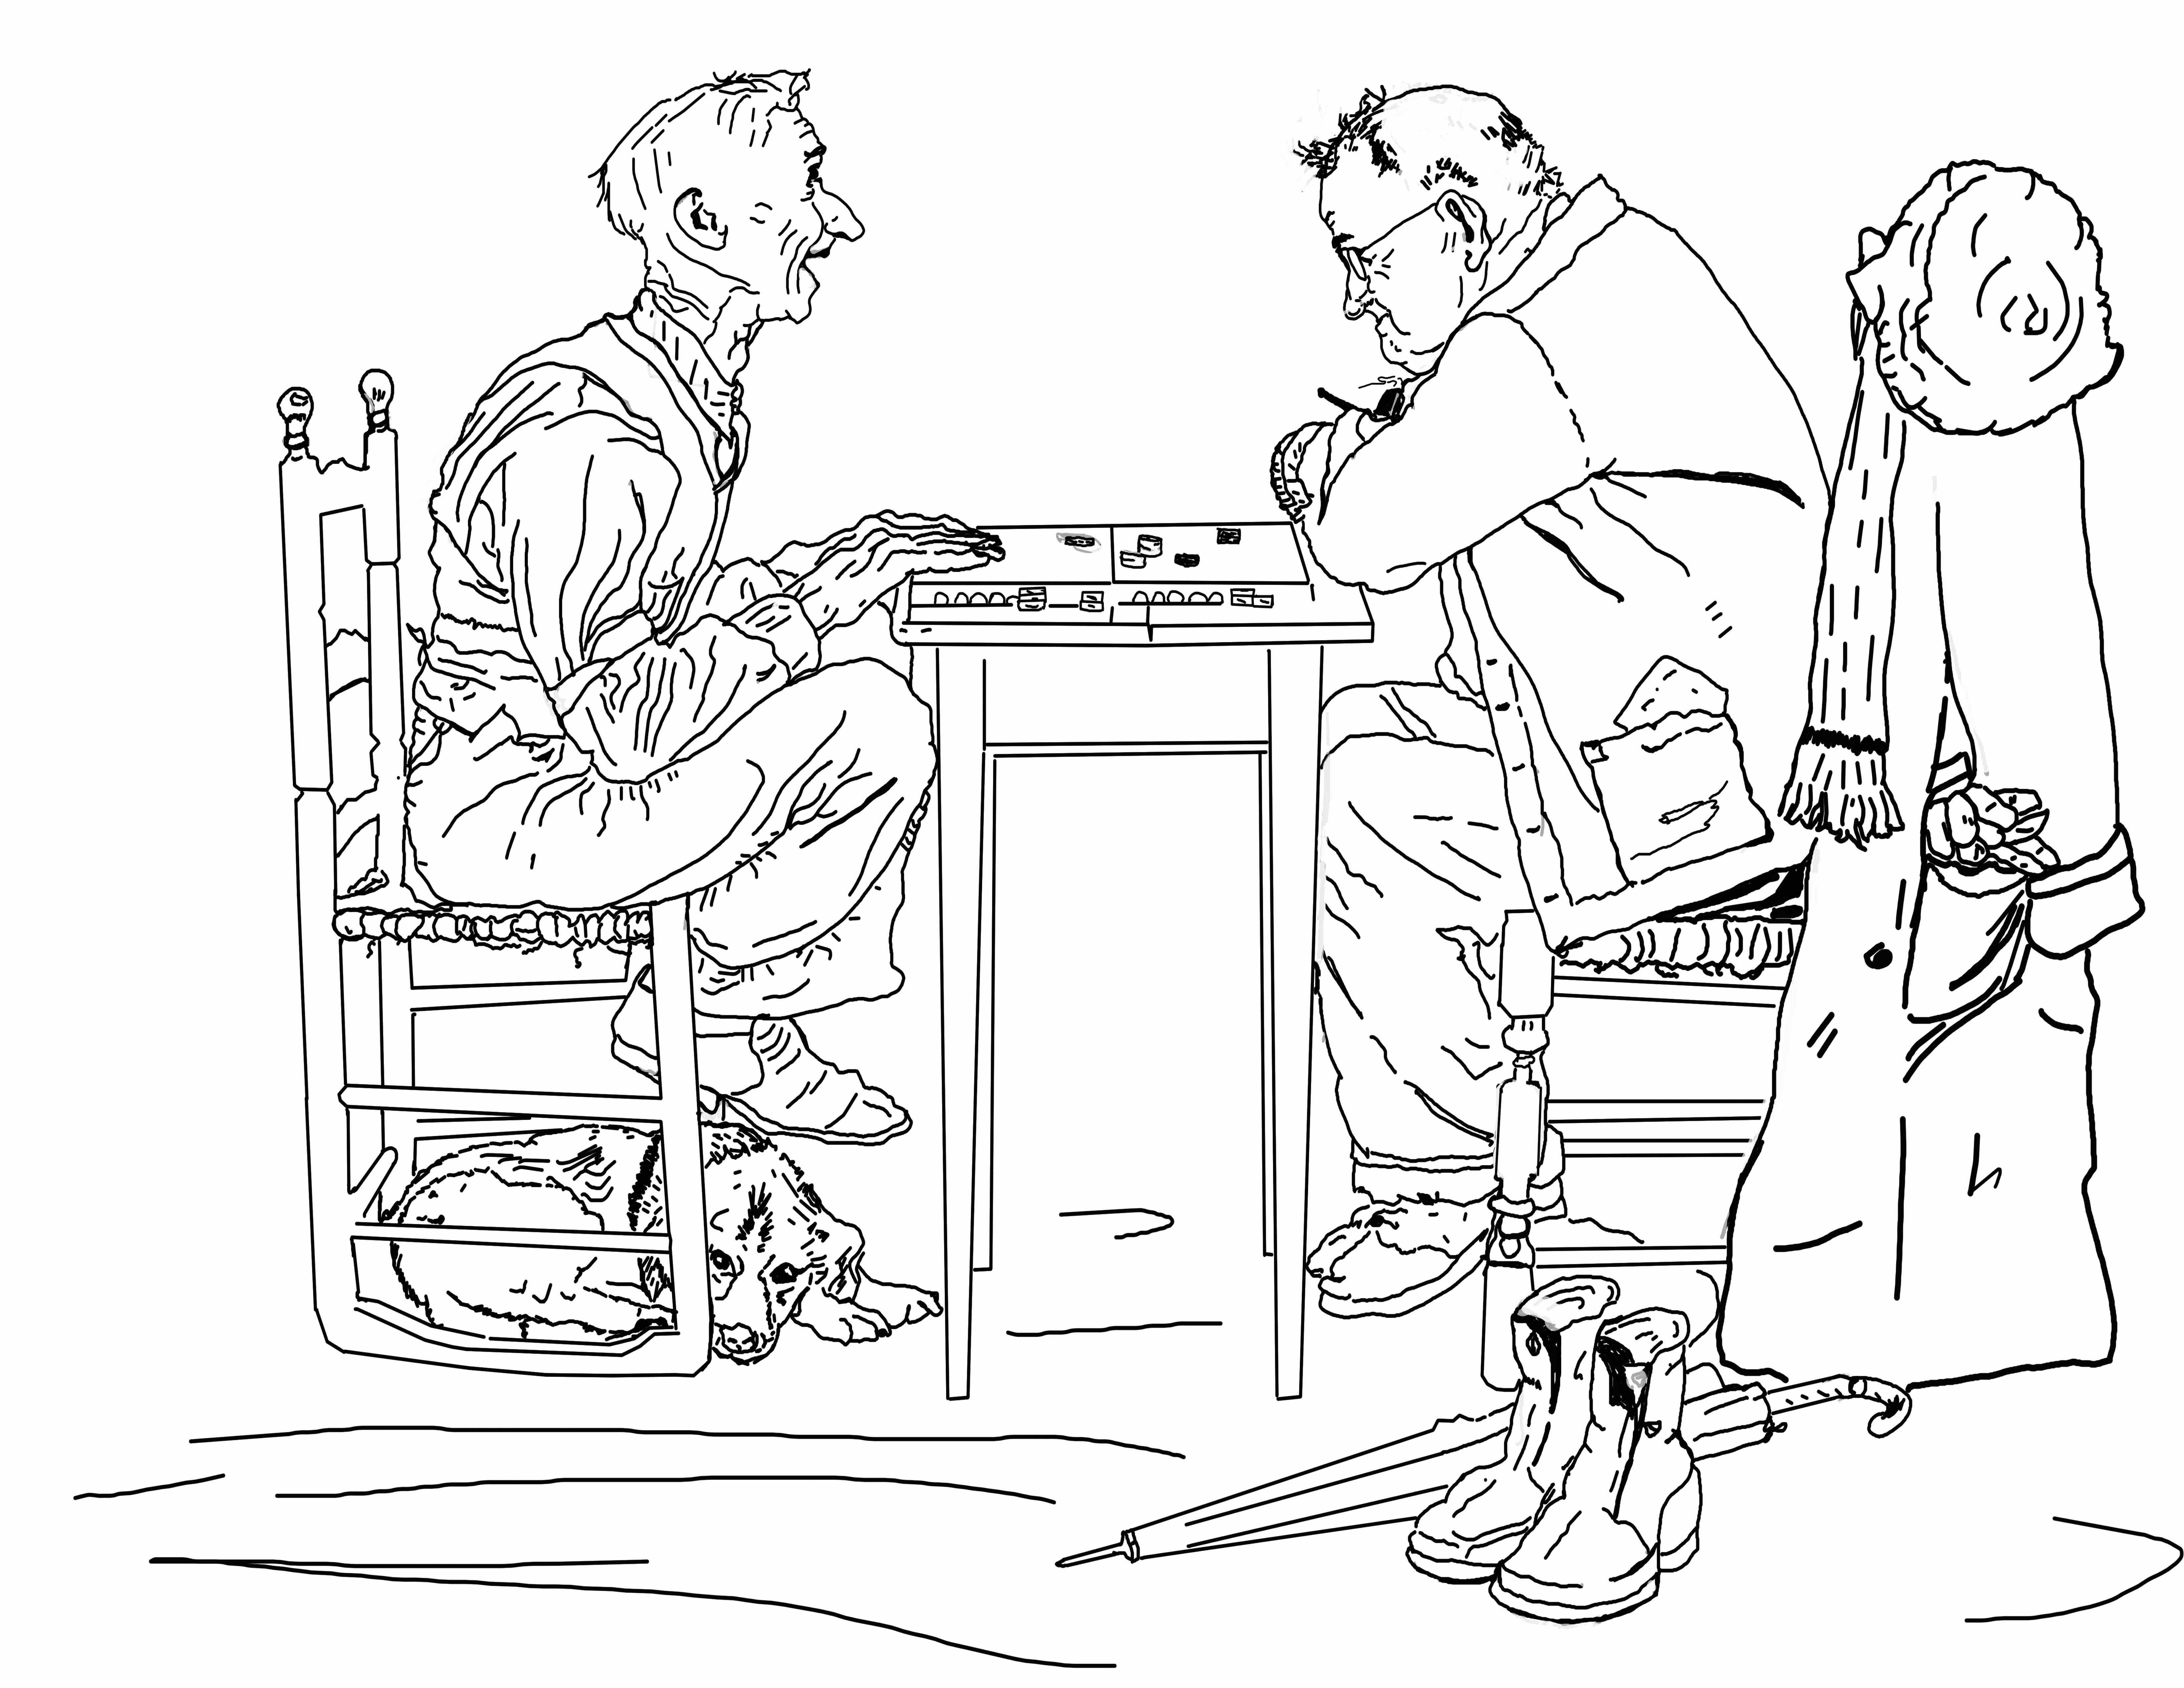 A coloring page adapted from a norman rockwell illustration hand drawn by lee olson available at premiumcolorâ coloring pages coloring books how to draw hands